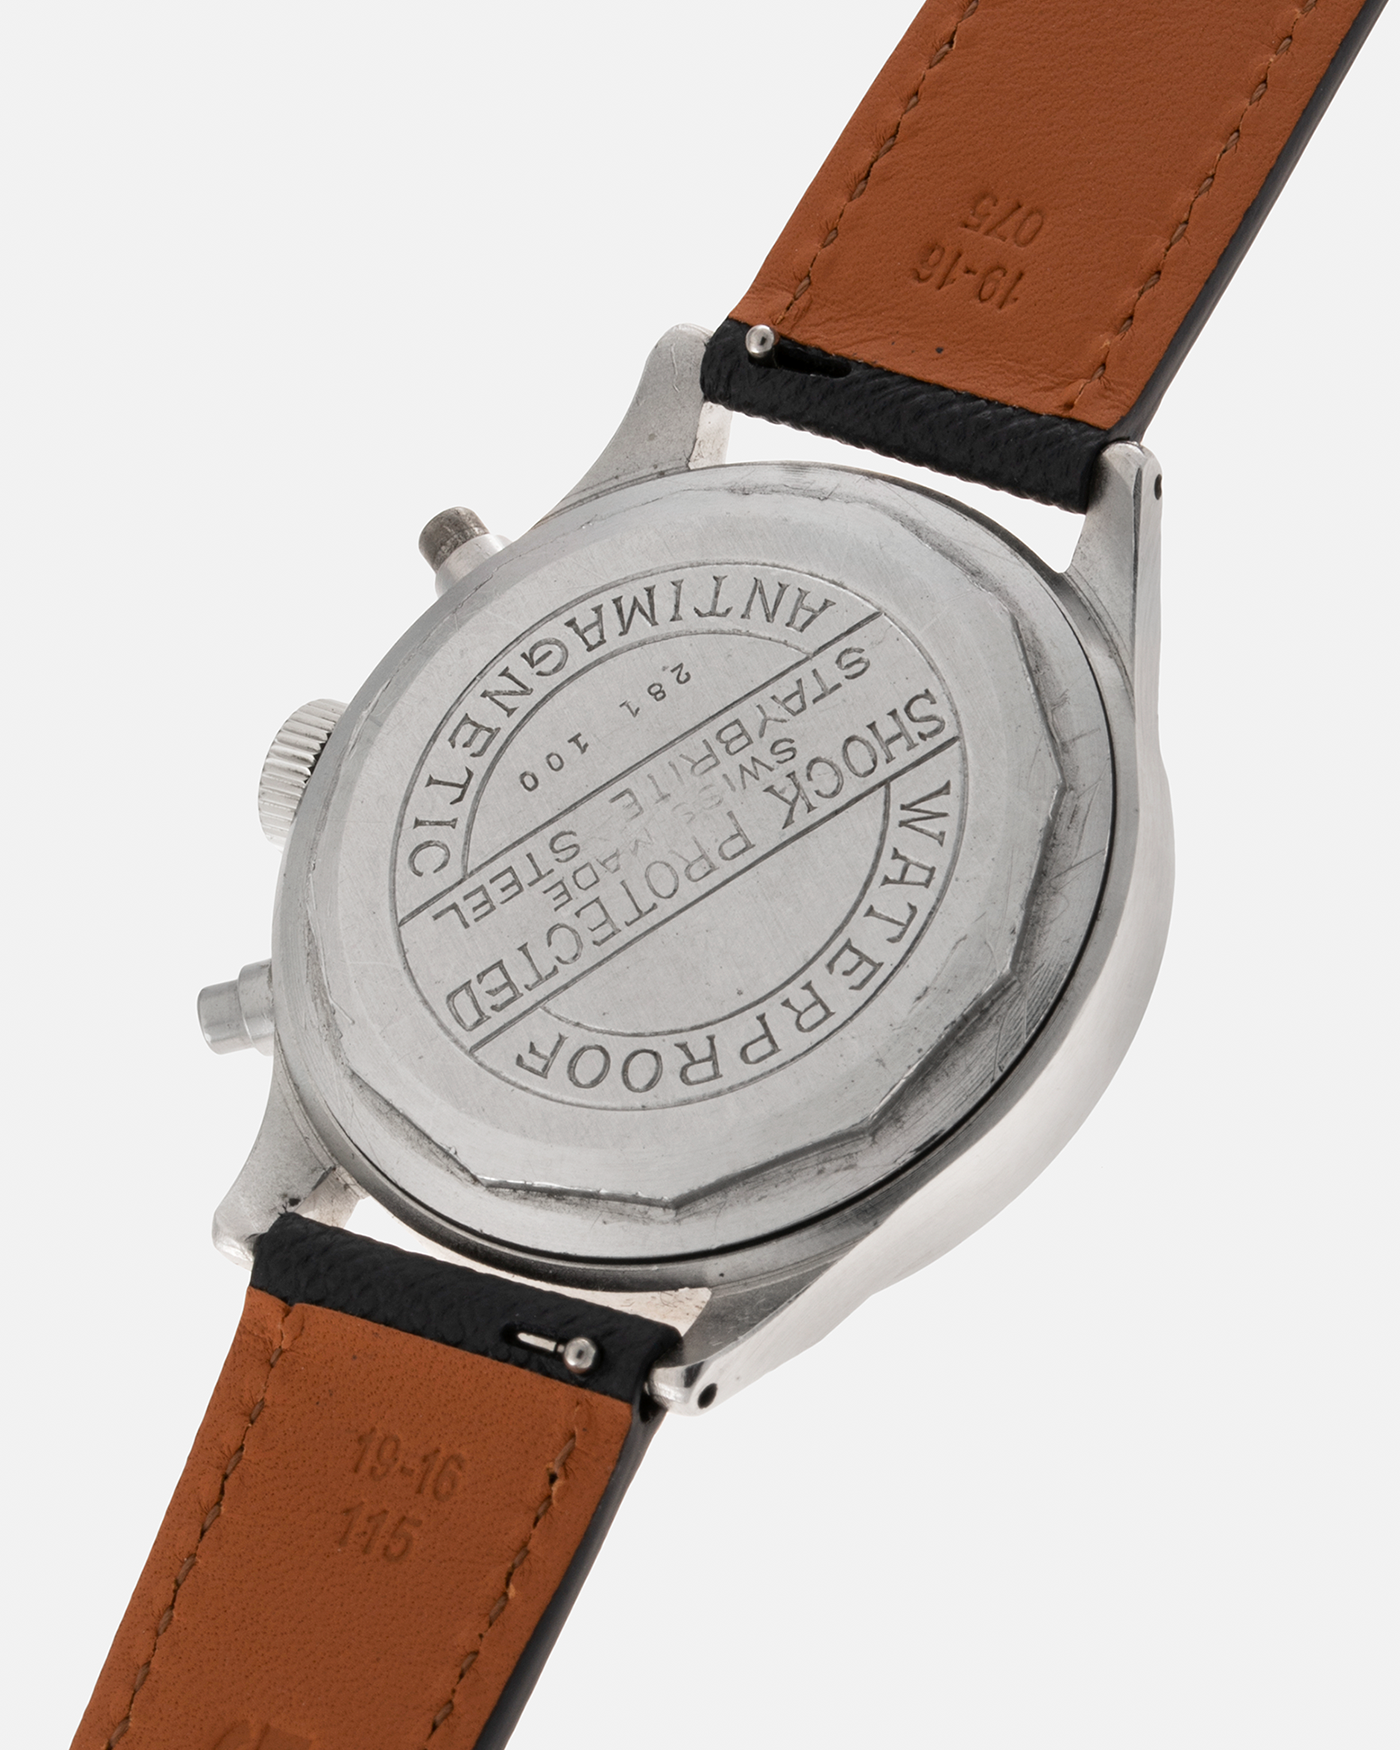 Brand: Mulco Year: 1940s Material: Stainless Steel Movement: Valjoux Cal. 22, Manual-Winding Case Diameter: 38mm (Spillman Case) Lug Width: 19mm Strap: Molequin Navy Blue Textured Calf Leather Strap